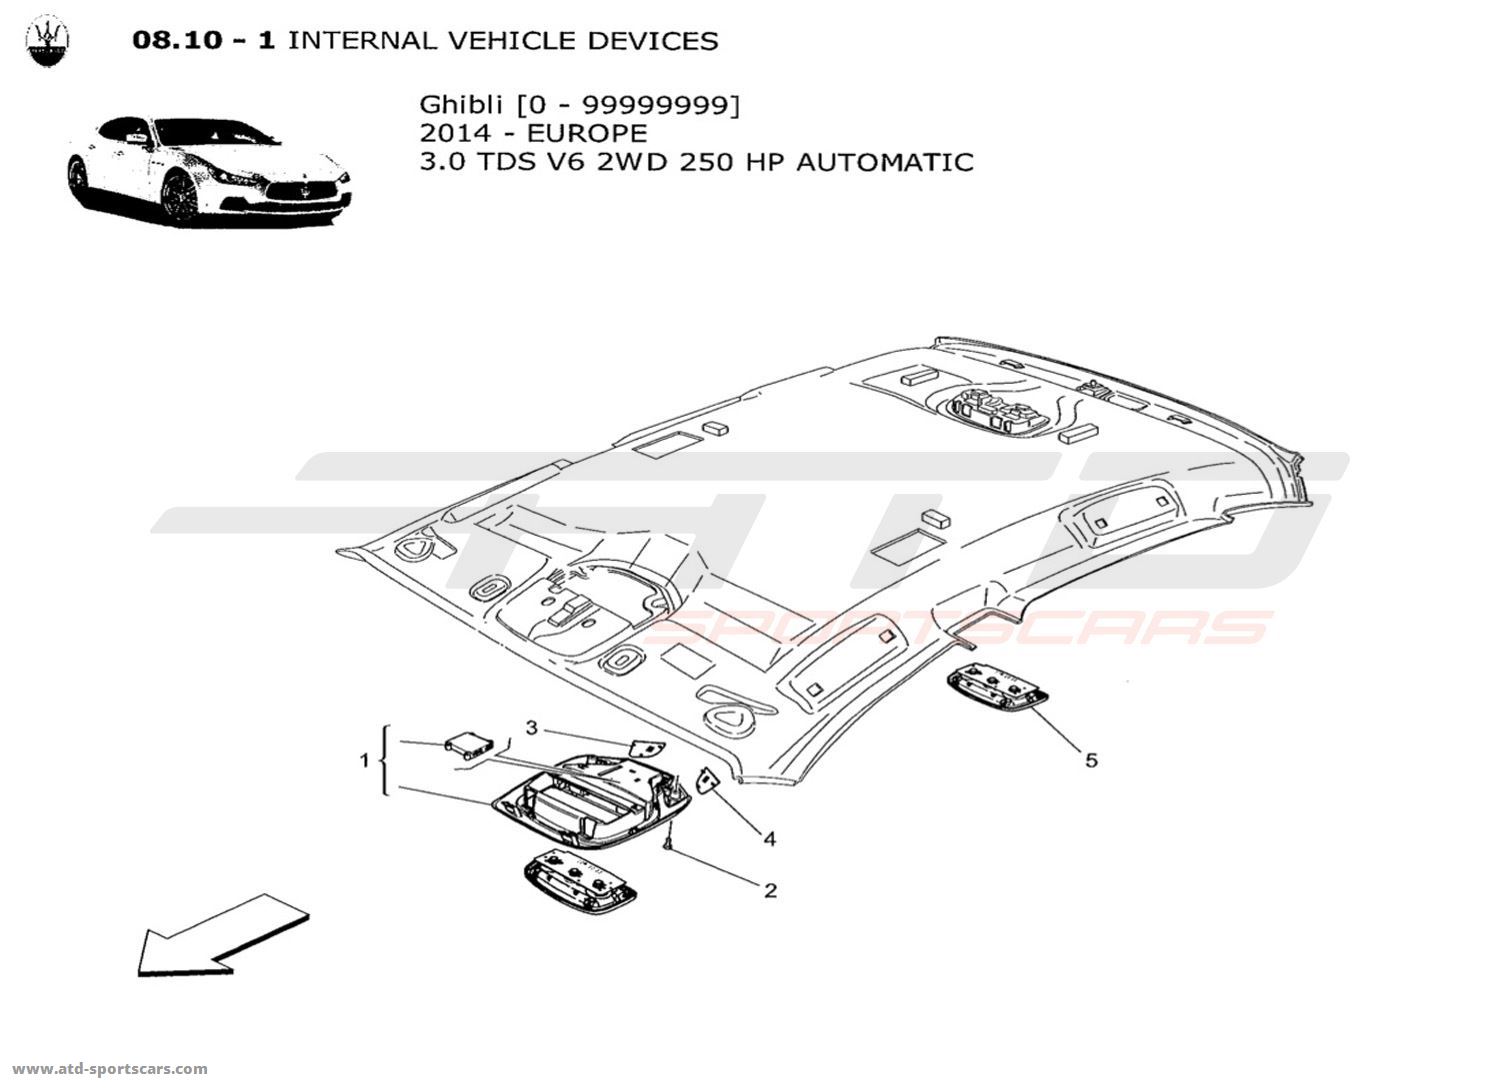 INTERNAL VEHICLE DEVICES